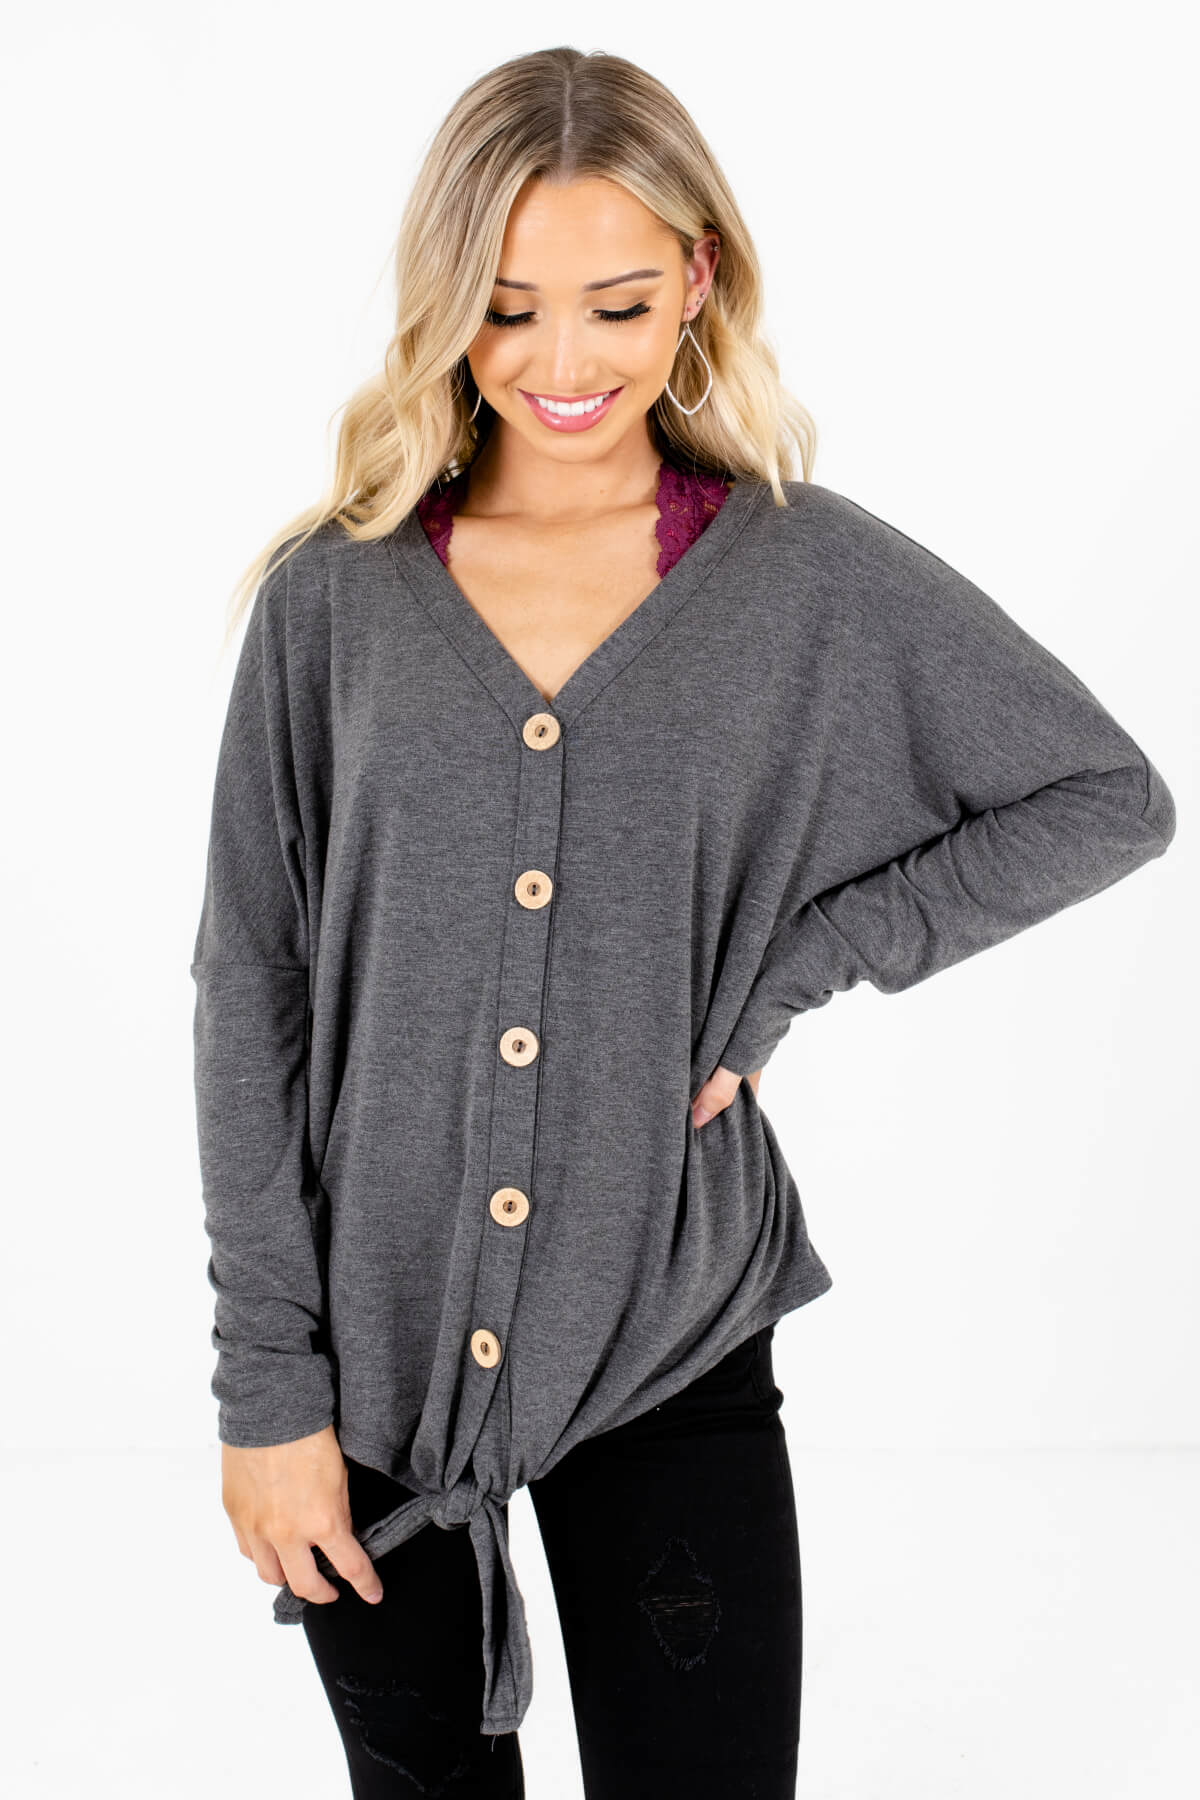 Charcoal Gray Button-Up Front Boutique Tops for Women